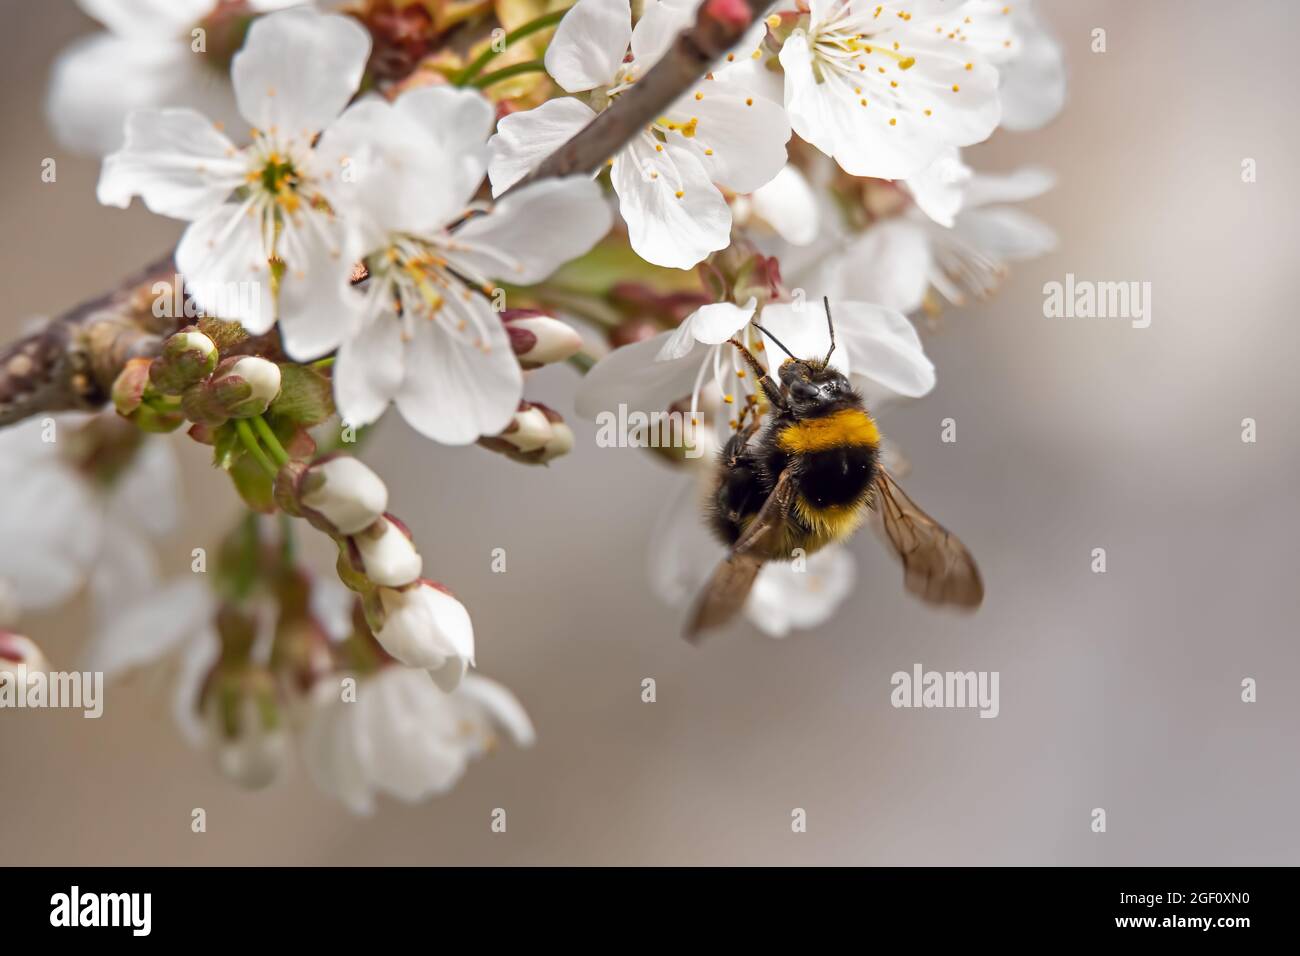 Bumble bee collecting pollen from white hawthorn flowers. Stock Photo